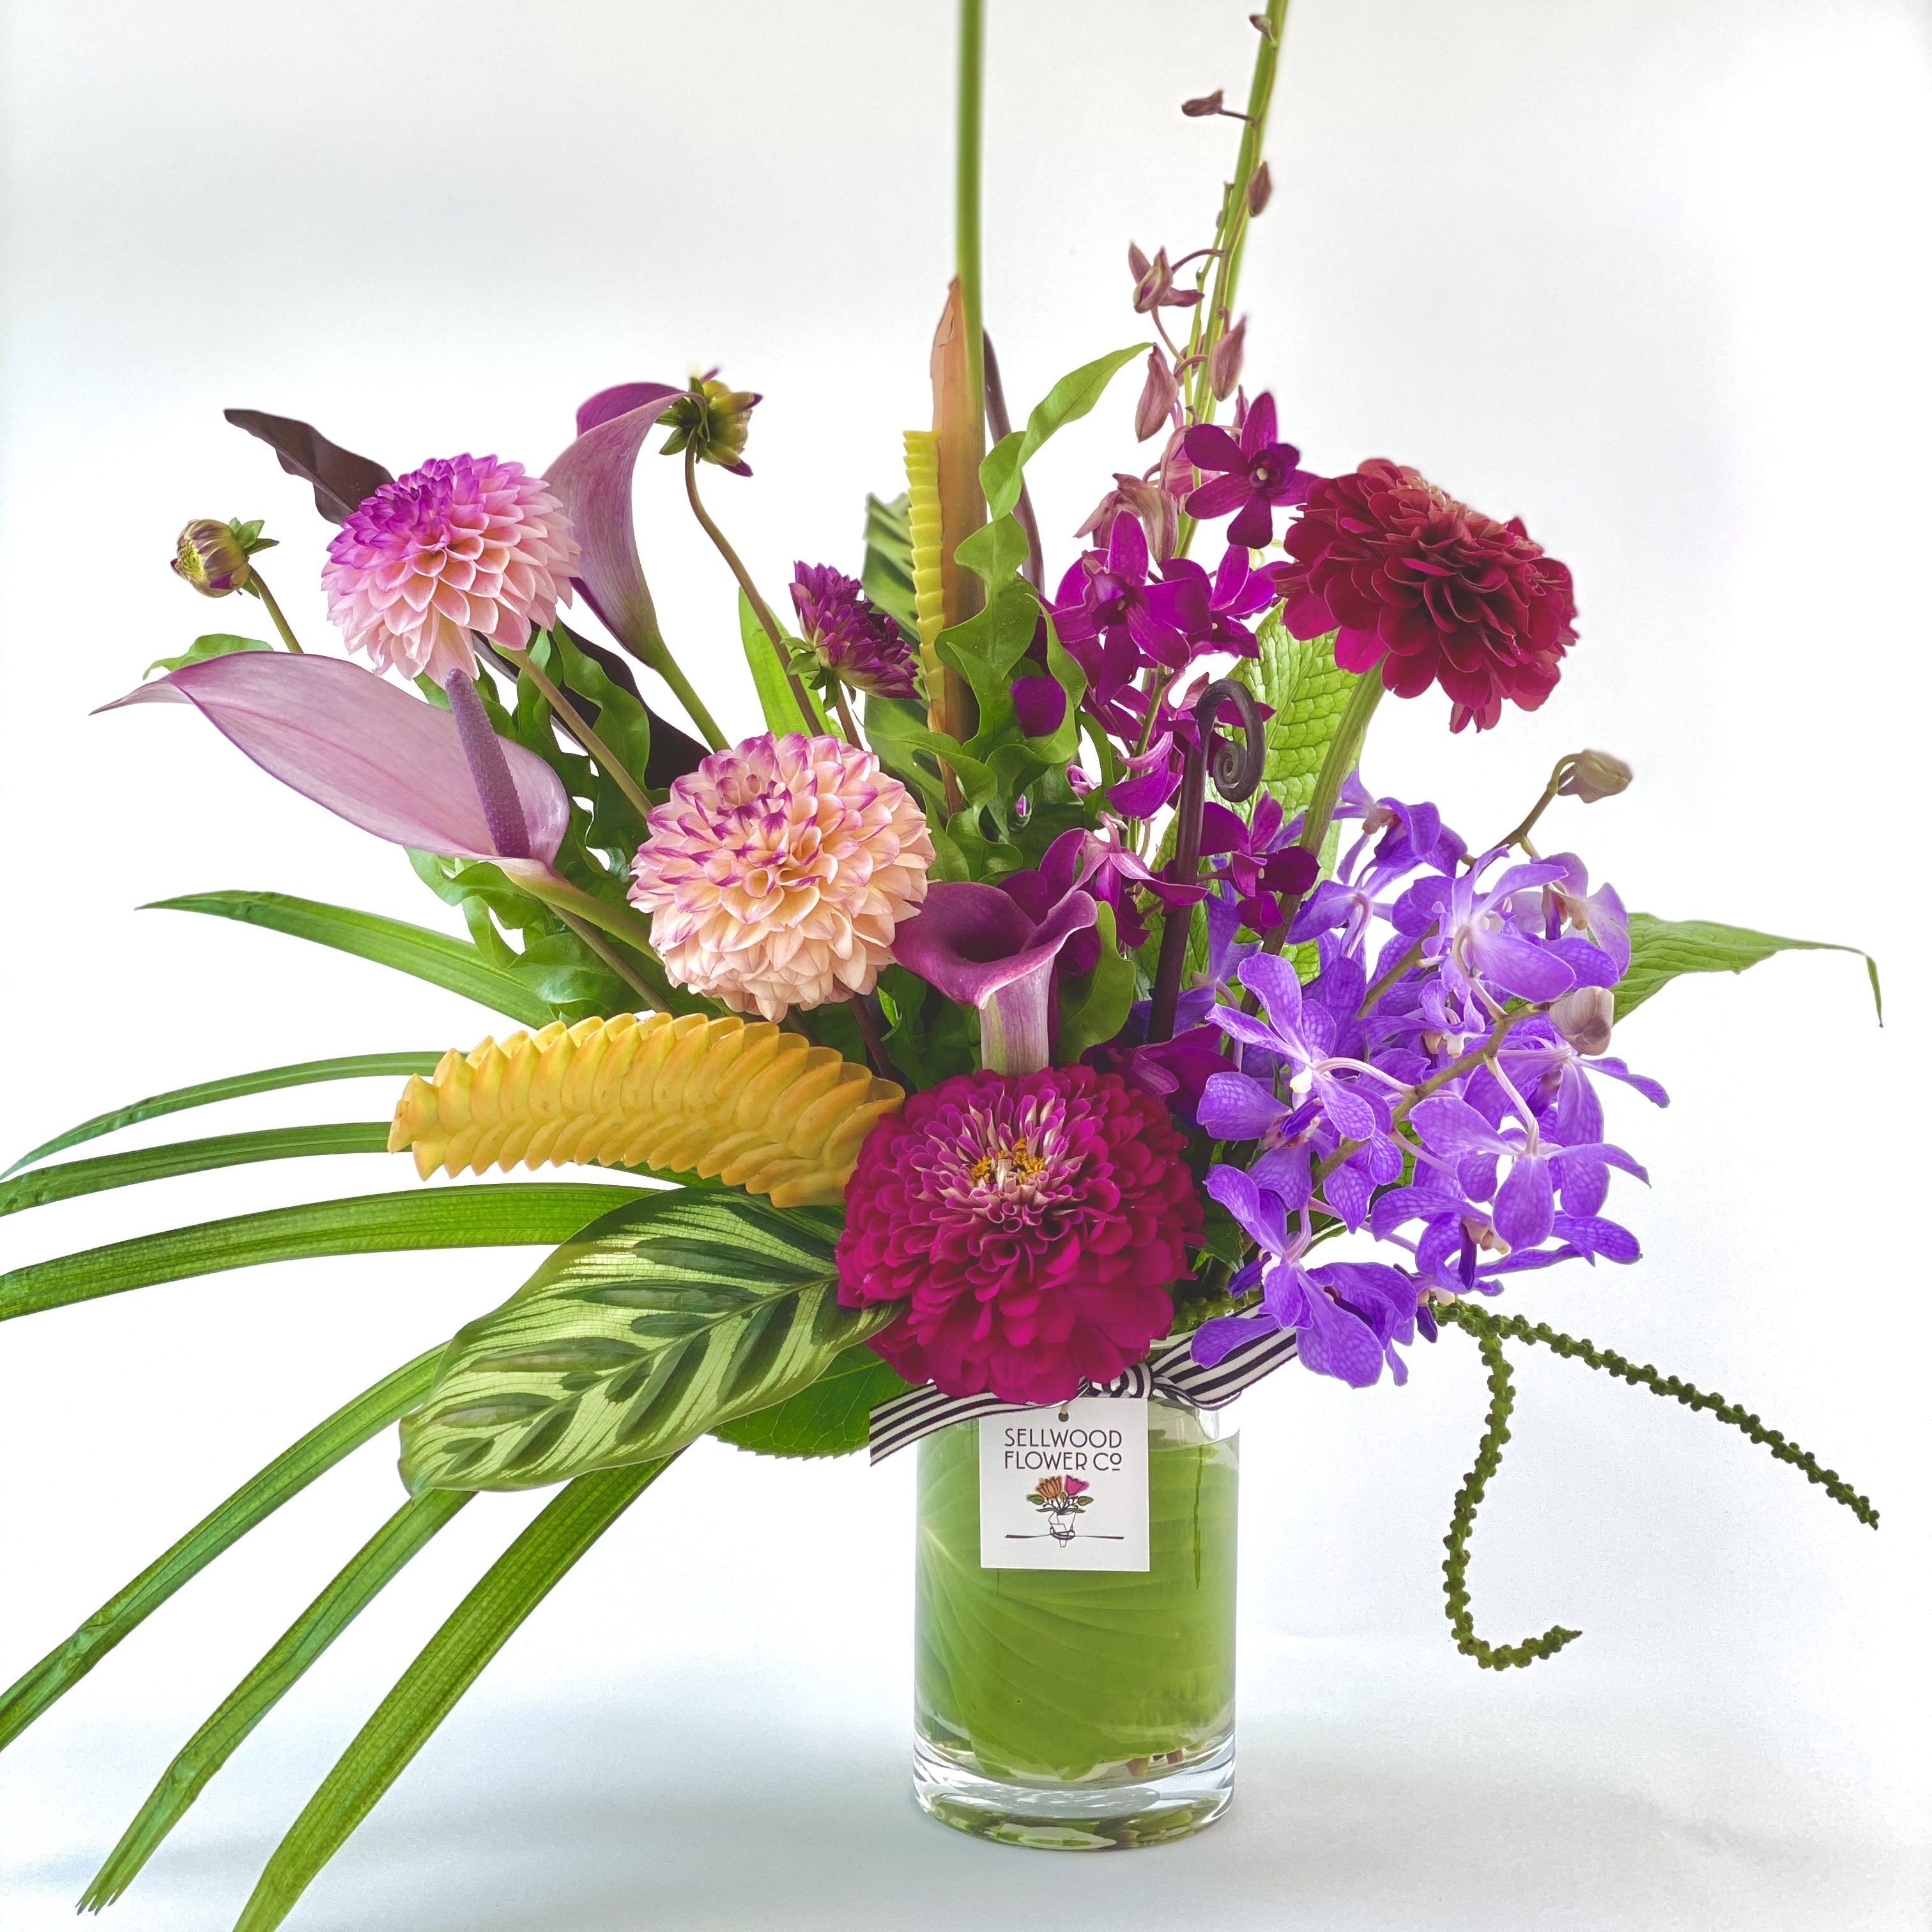 Day Dreaming Of Hawaii - A colorful assortment of tropical flowers from the gardens in Hilo, Hawaii artfully arranged in a clear cylinder finished with our house ribbon.  